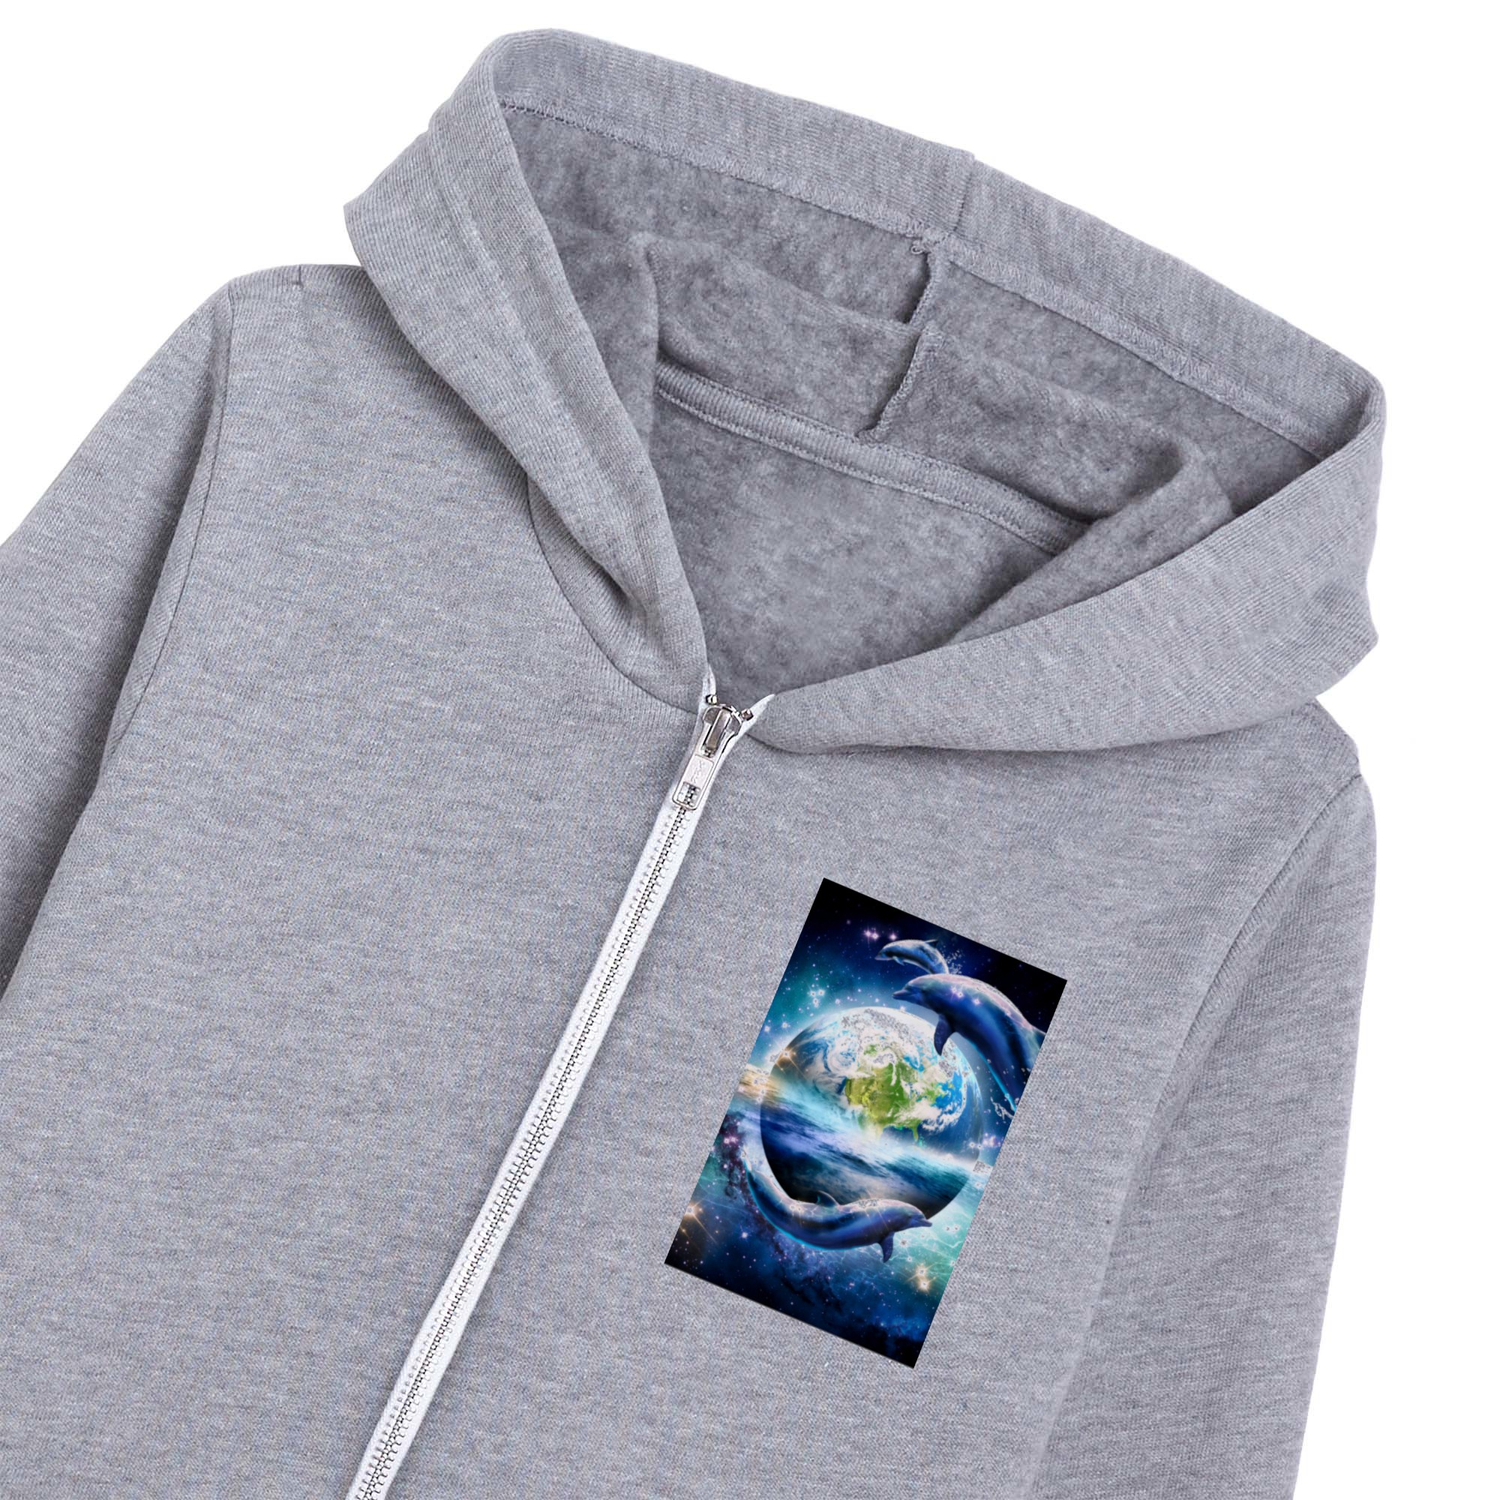 dolphins youth hoodie